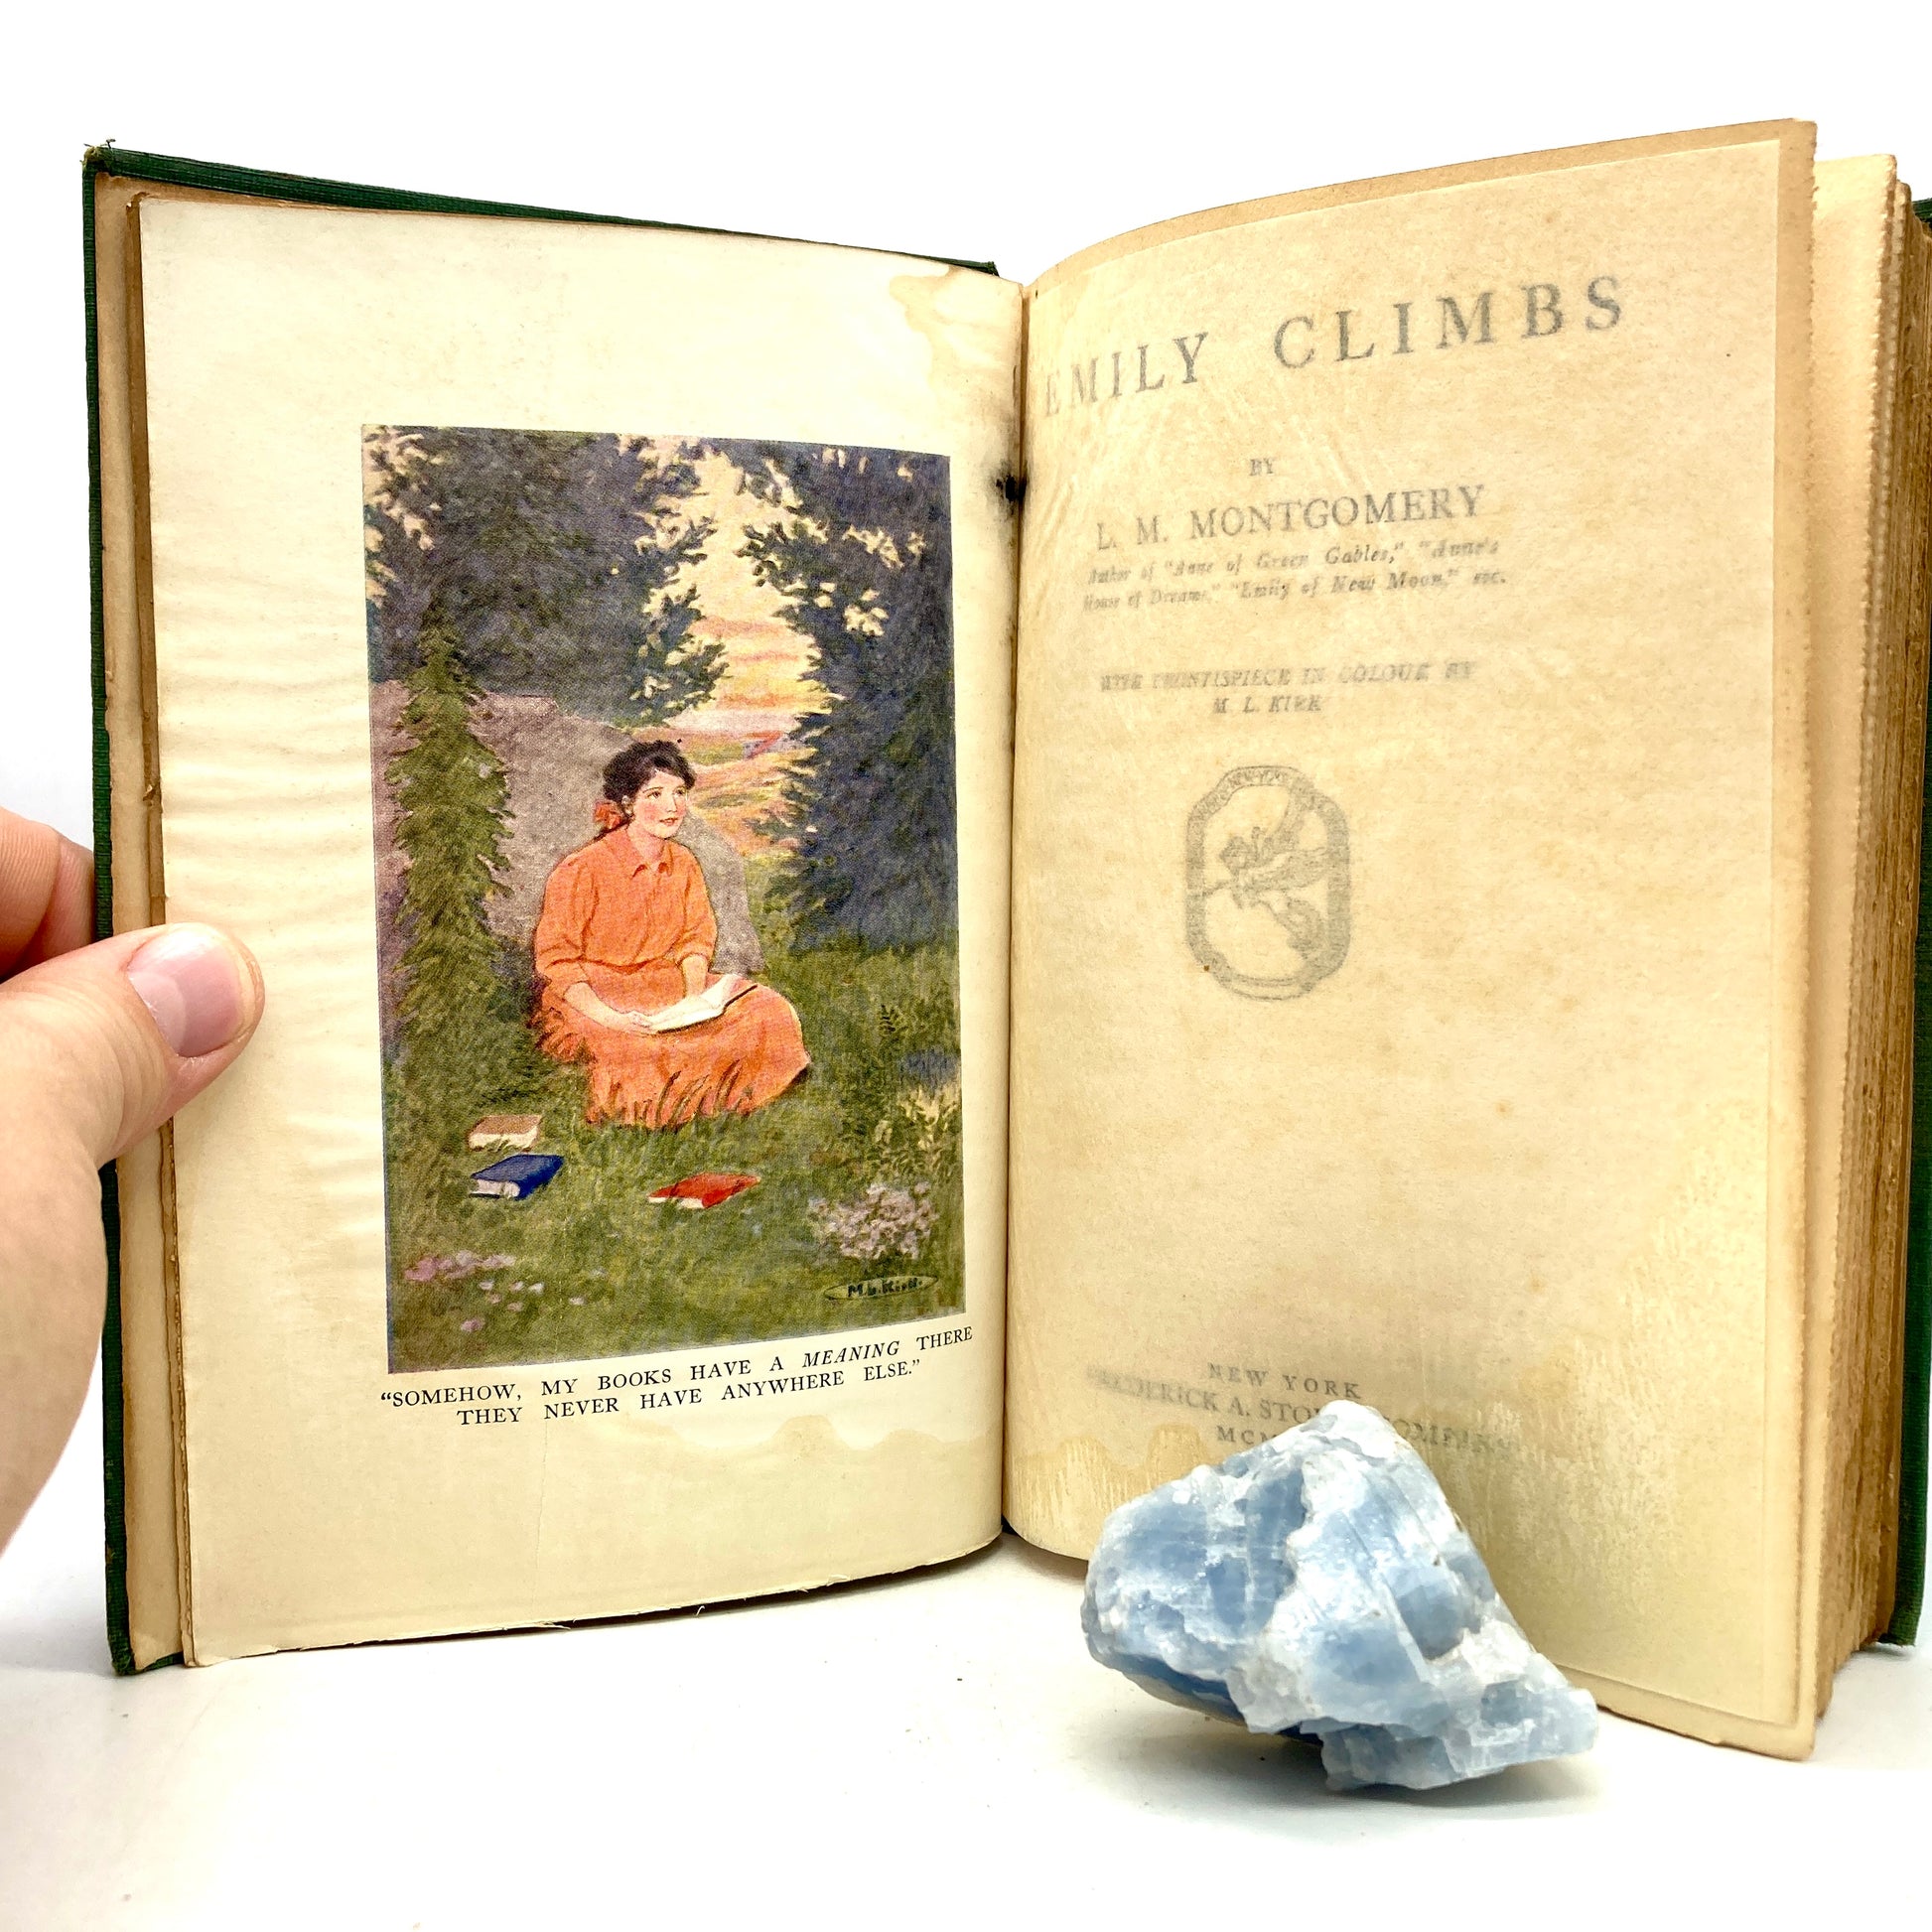 MONTGOMERY, L.M. "Emily Climbs" [Frederick A. Stokes, 1925] 1st Edition - Buzz Bookstore